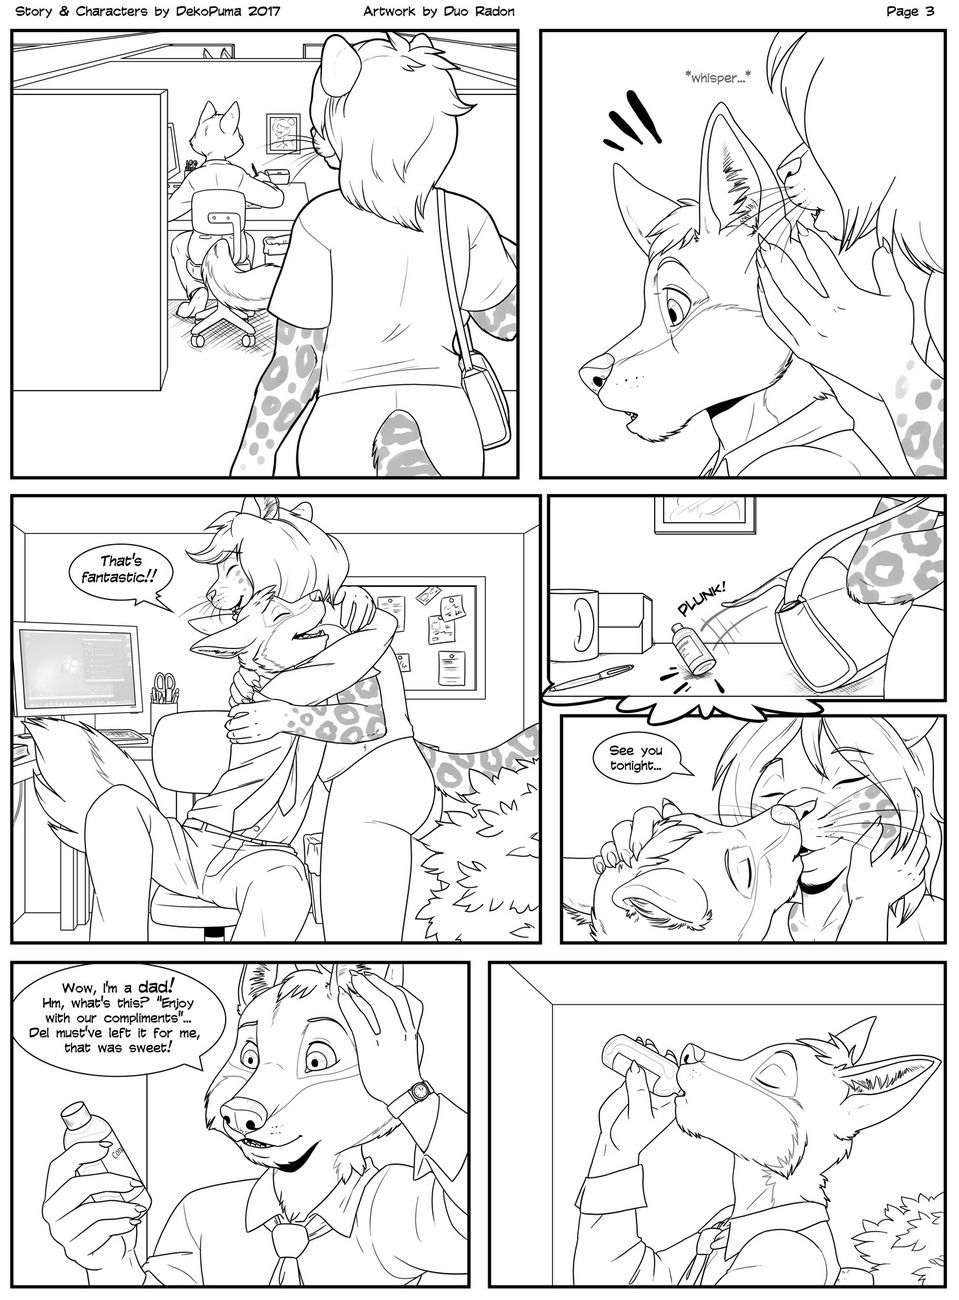 Extra Melk page 1